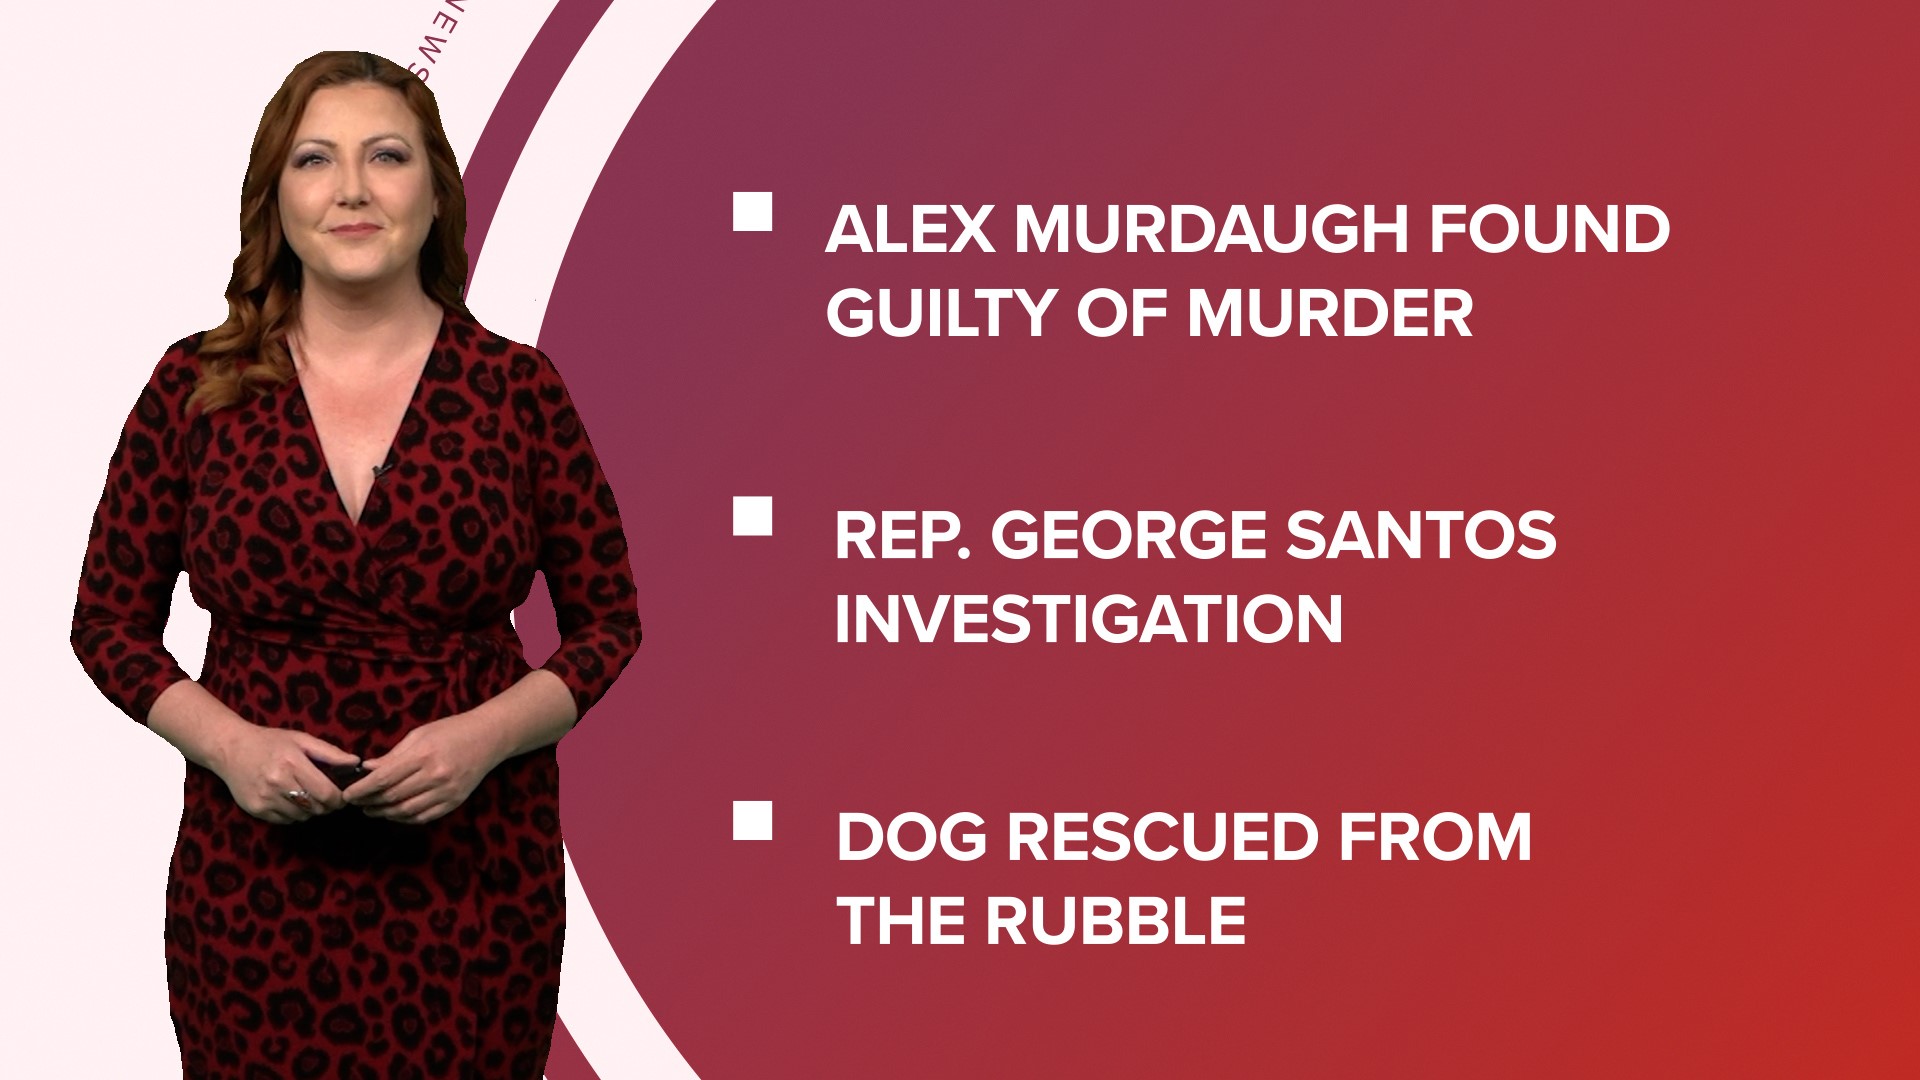 A look at what is happening in the news from Alex Murdaugh found guilty of murder to where to watch Oscar nominated movies and Girl Scout cookie facts.